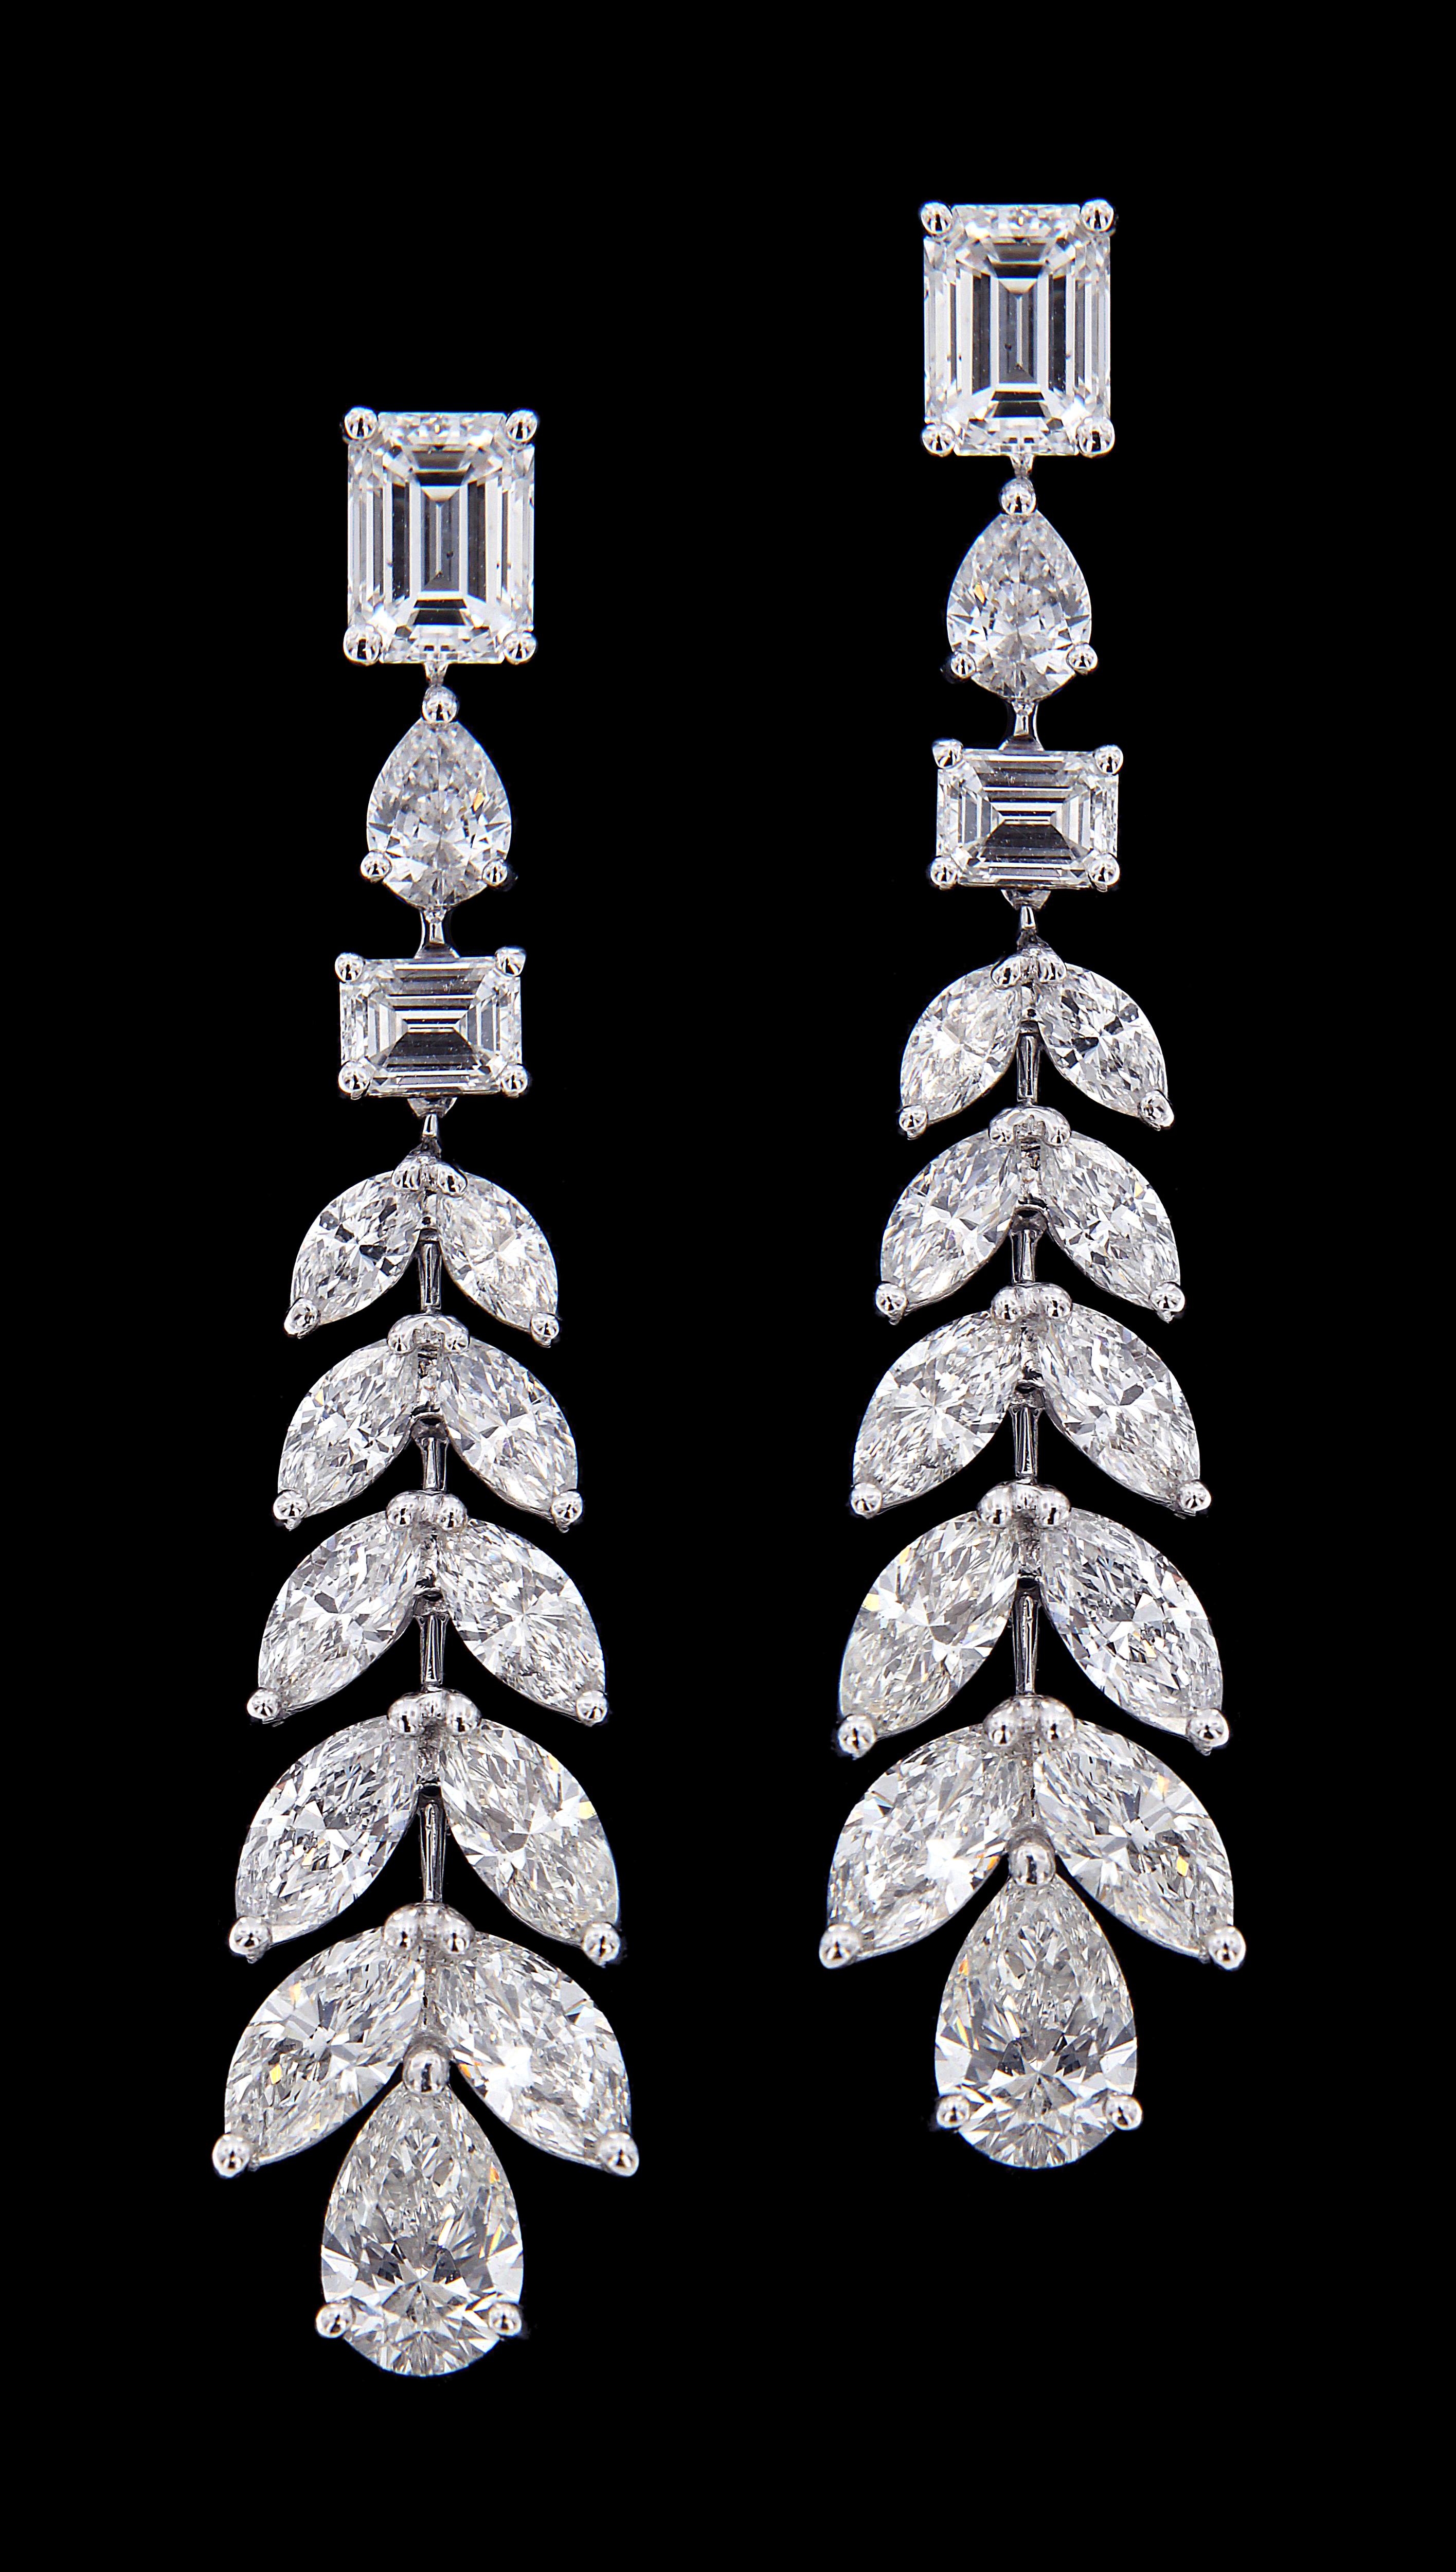 Marquise Cut Sumptuous 18 Karat White Gold and Diamond Wedding Earrings For Sale